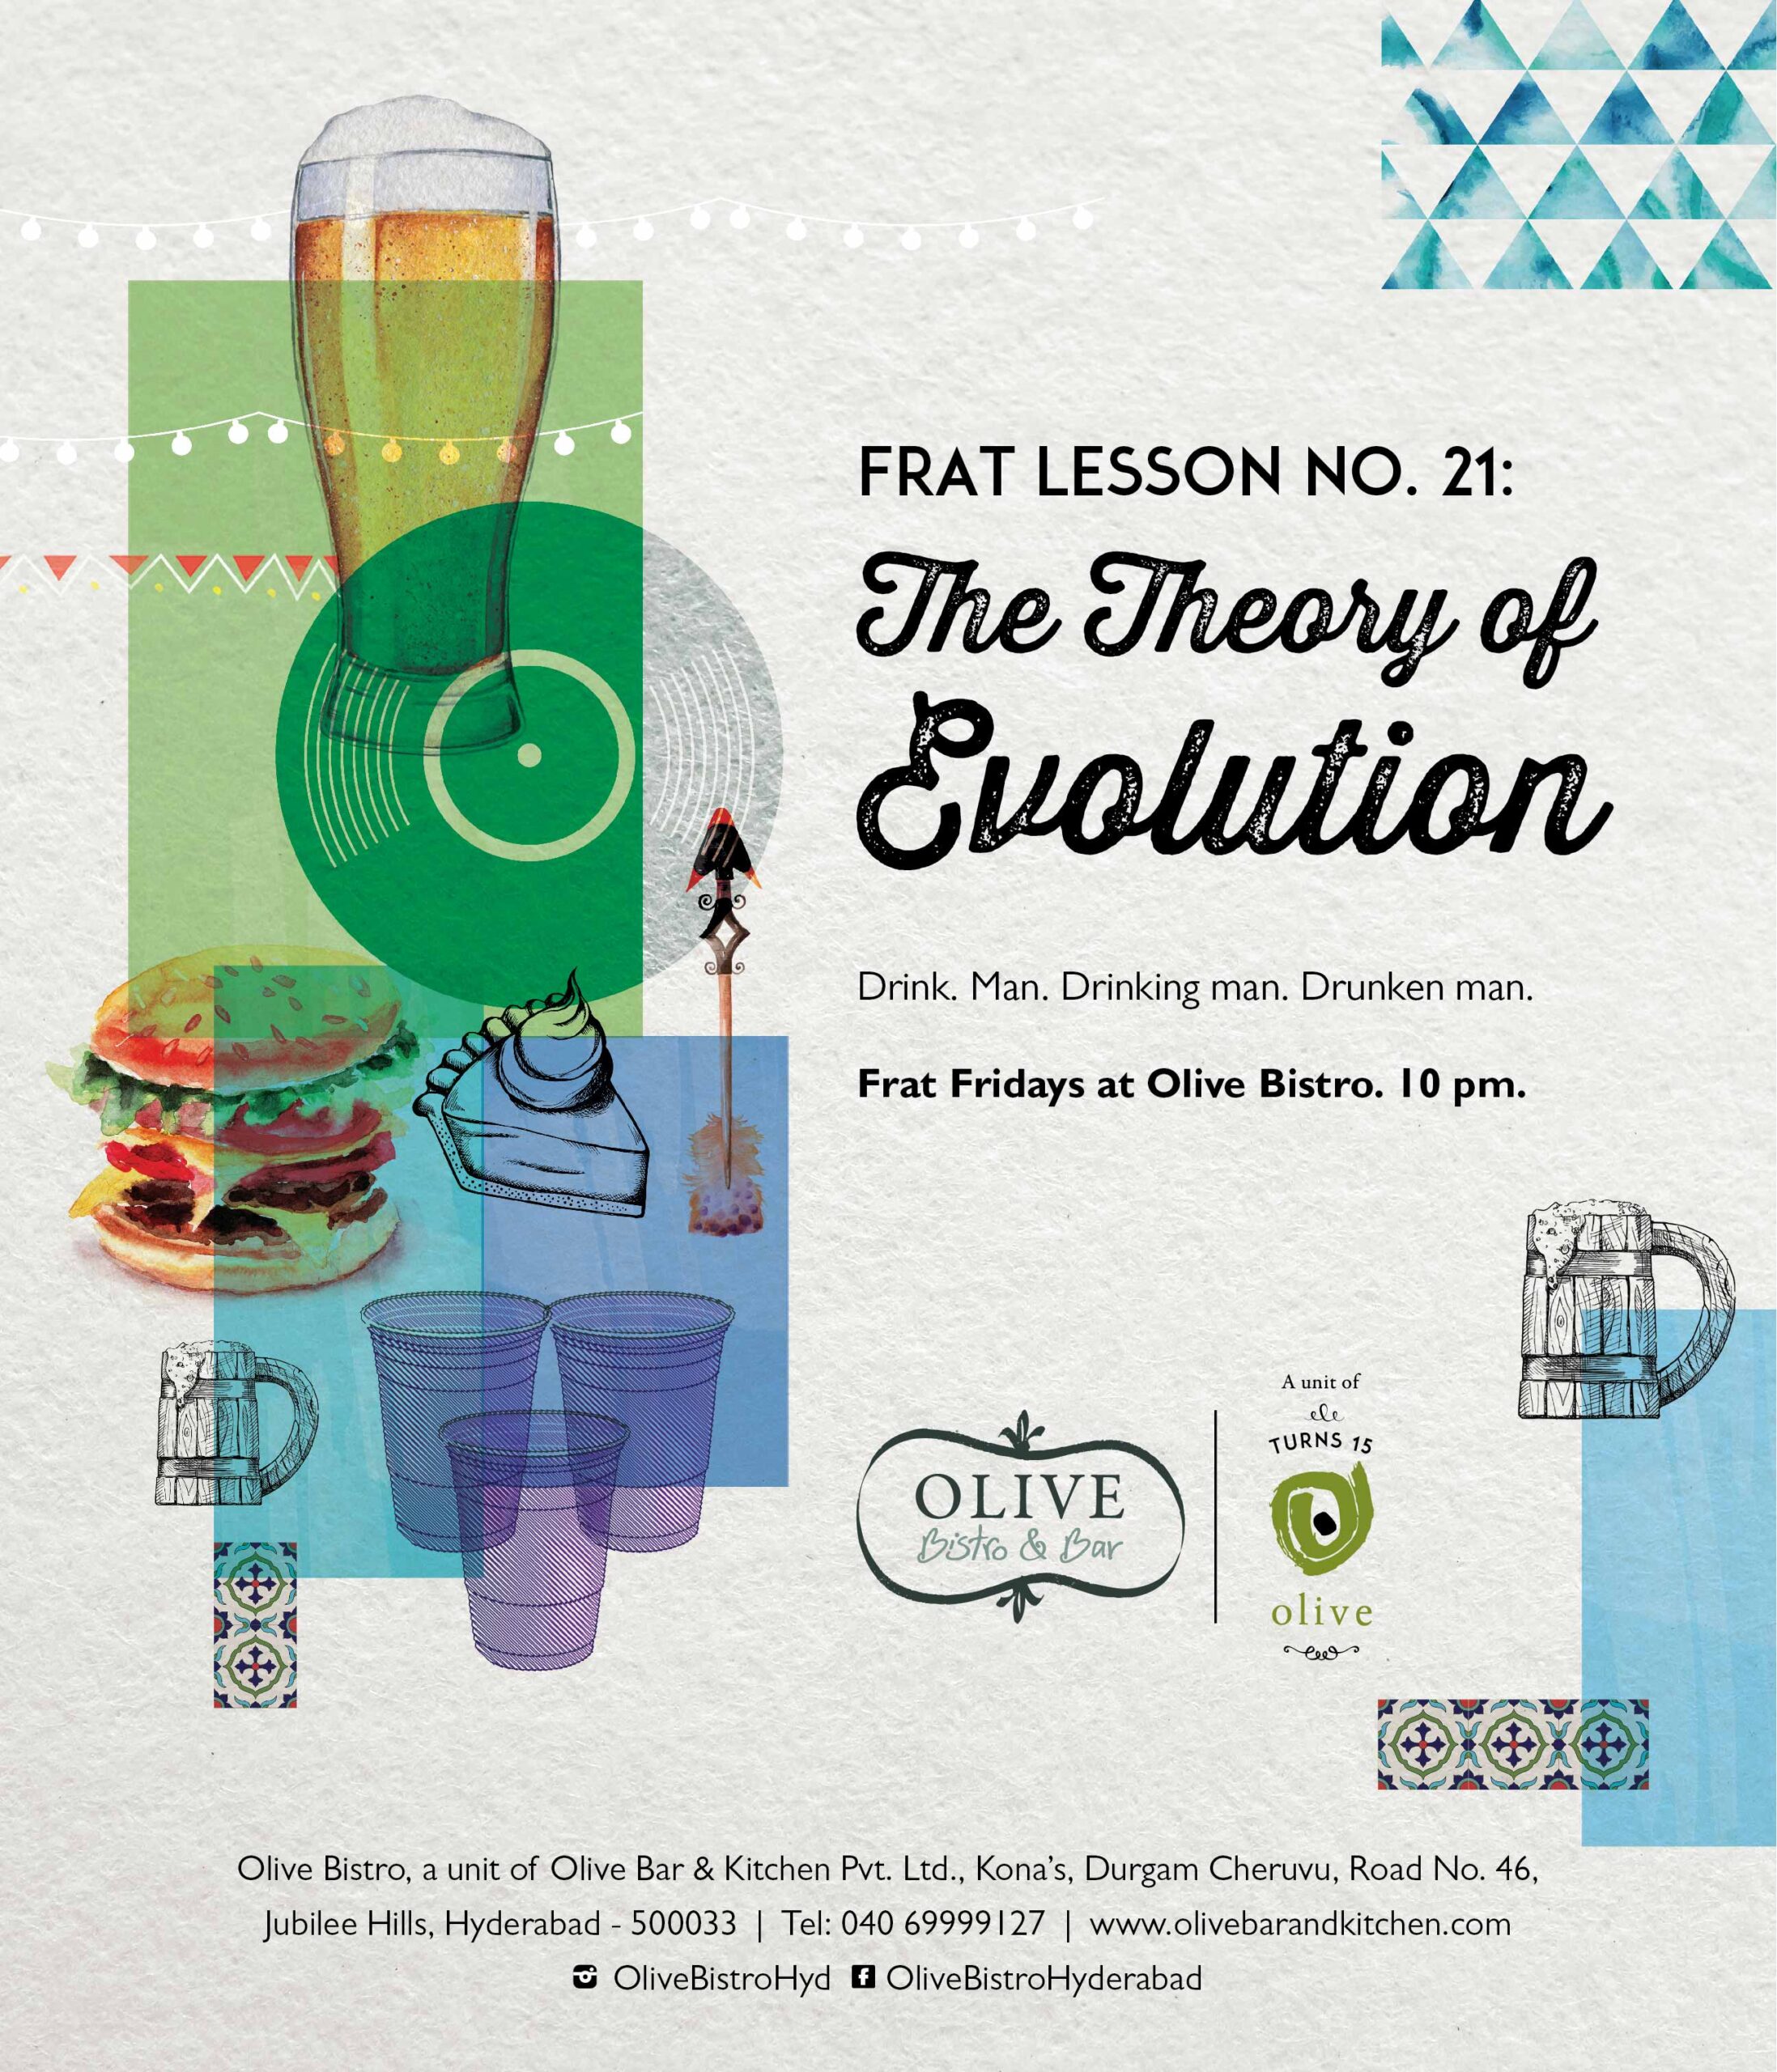 This poster for Frat Fridays at Olive Bistro, Hyderabad shows how evolution happened once man discovered alcohol.